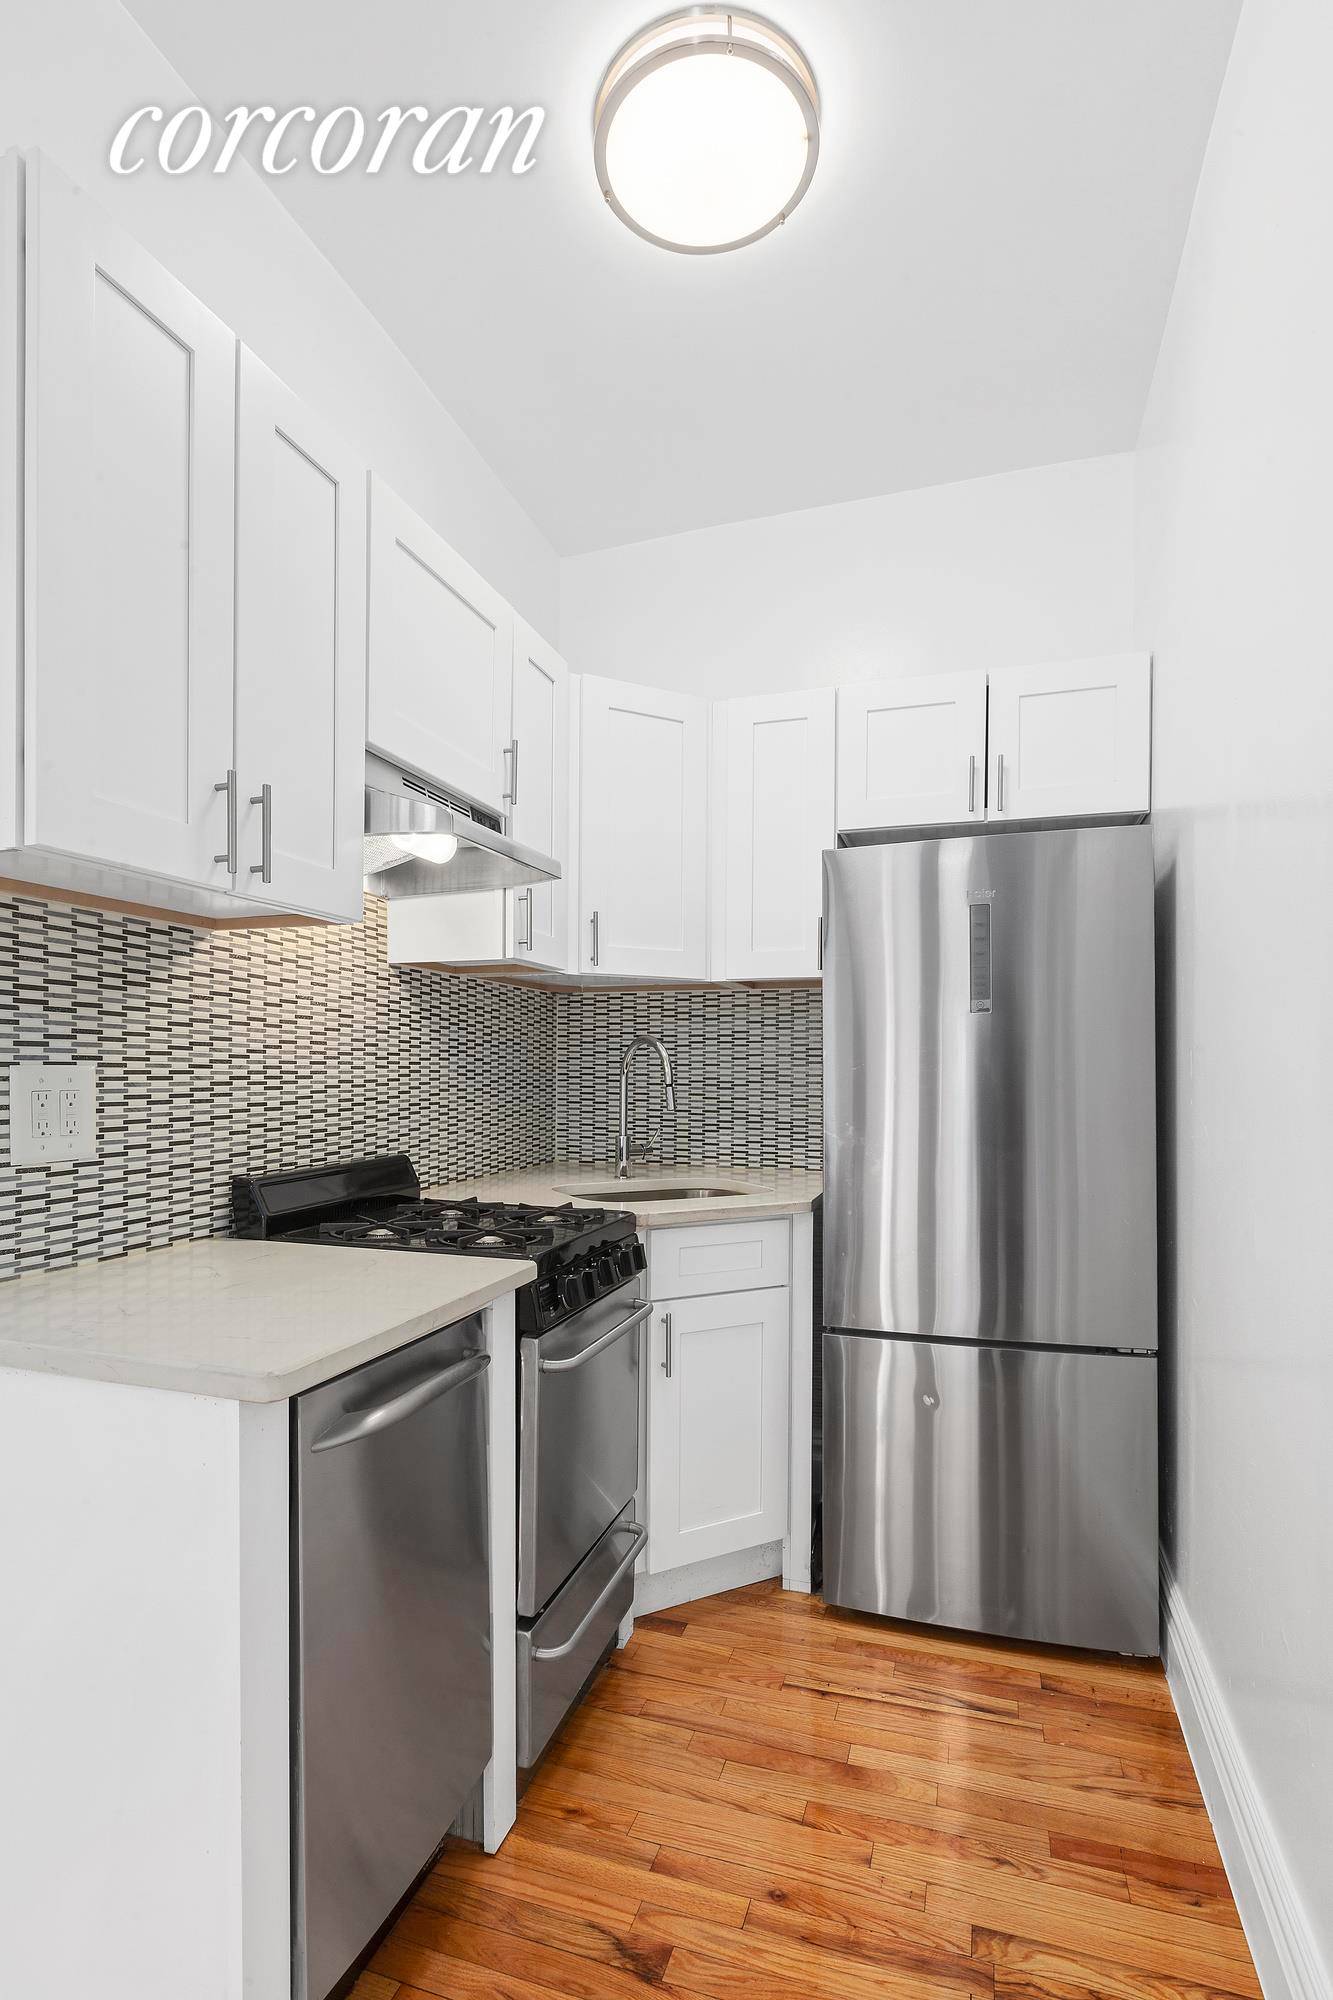 IMMEDIATE MOVE IN ! 243 Henry Street is extremely peaceful, BRIGHT and only seconds away from the East River.